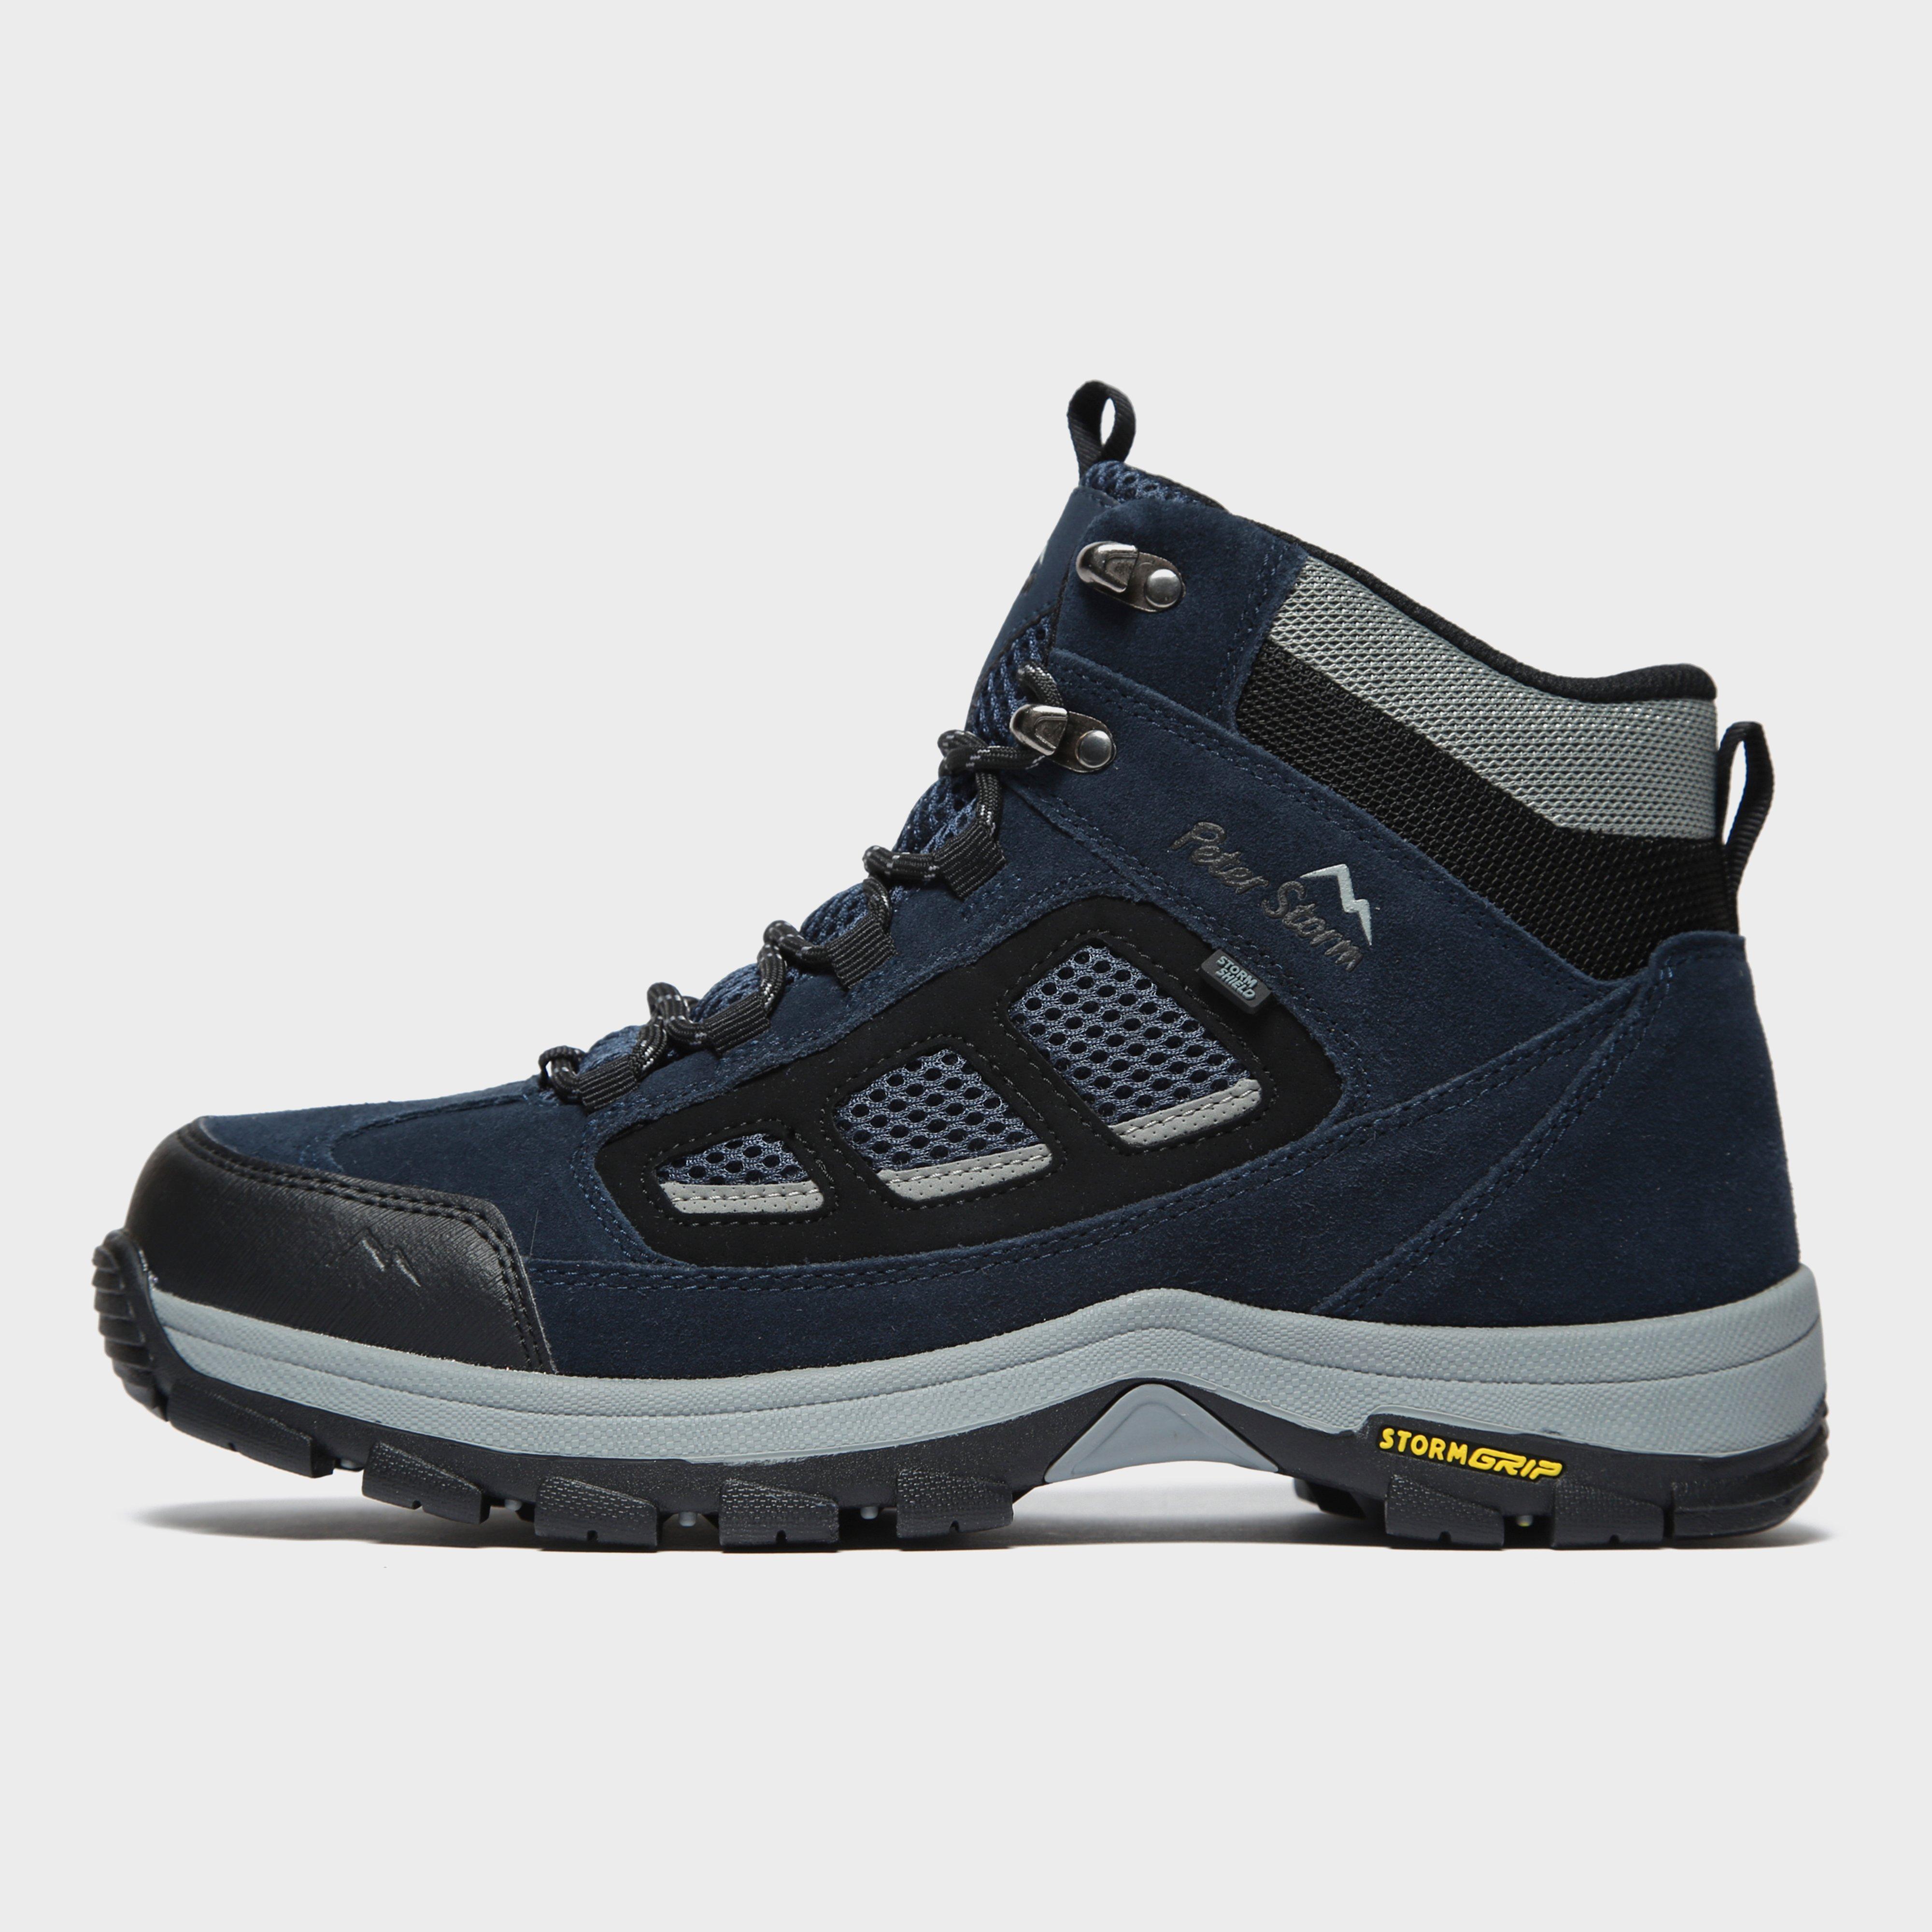 Peter Storm Mens Camborne Mid Walking Boots - Navy/nvy  Navy/nvy